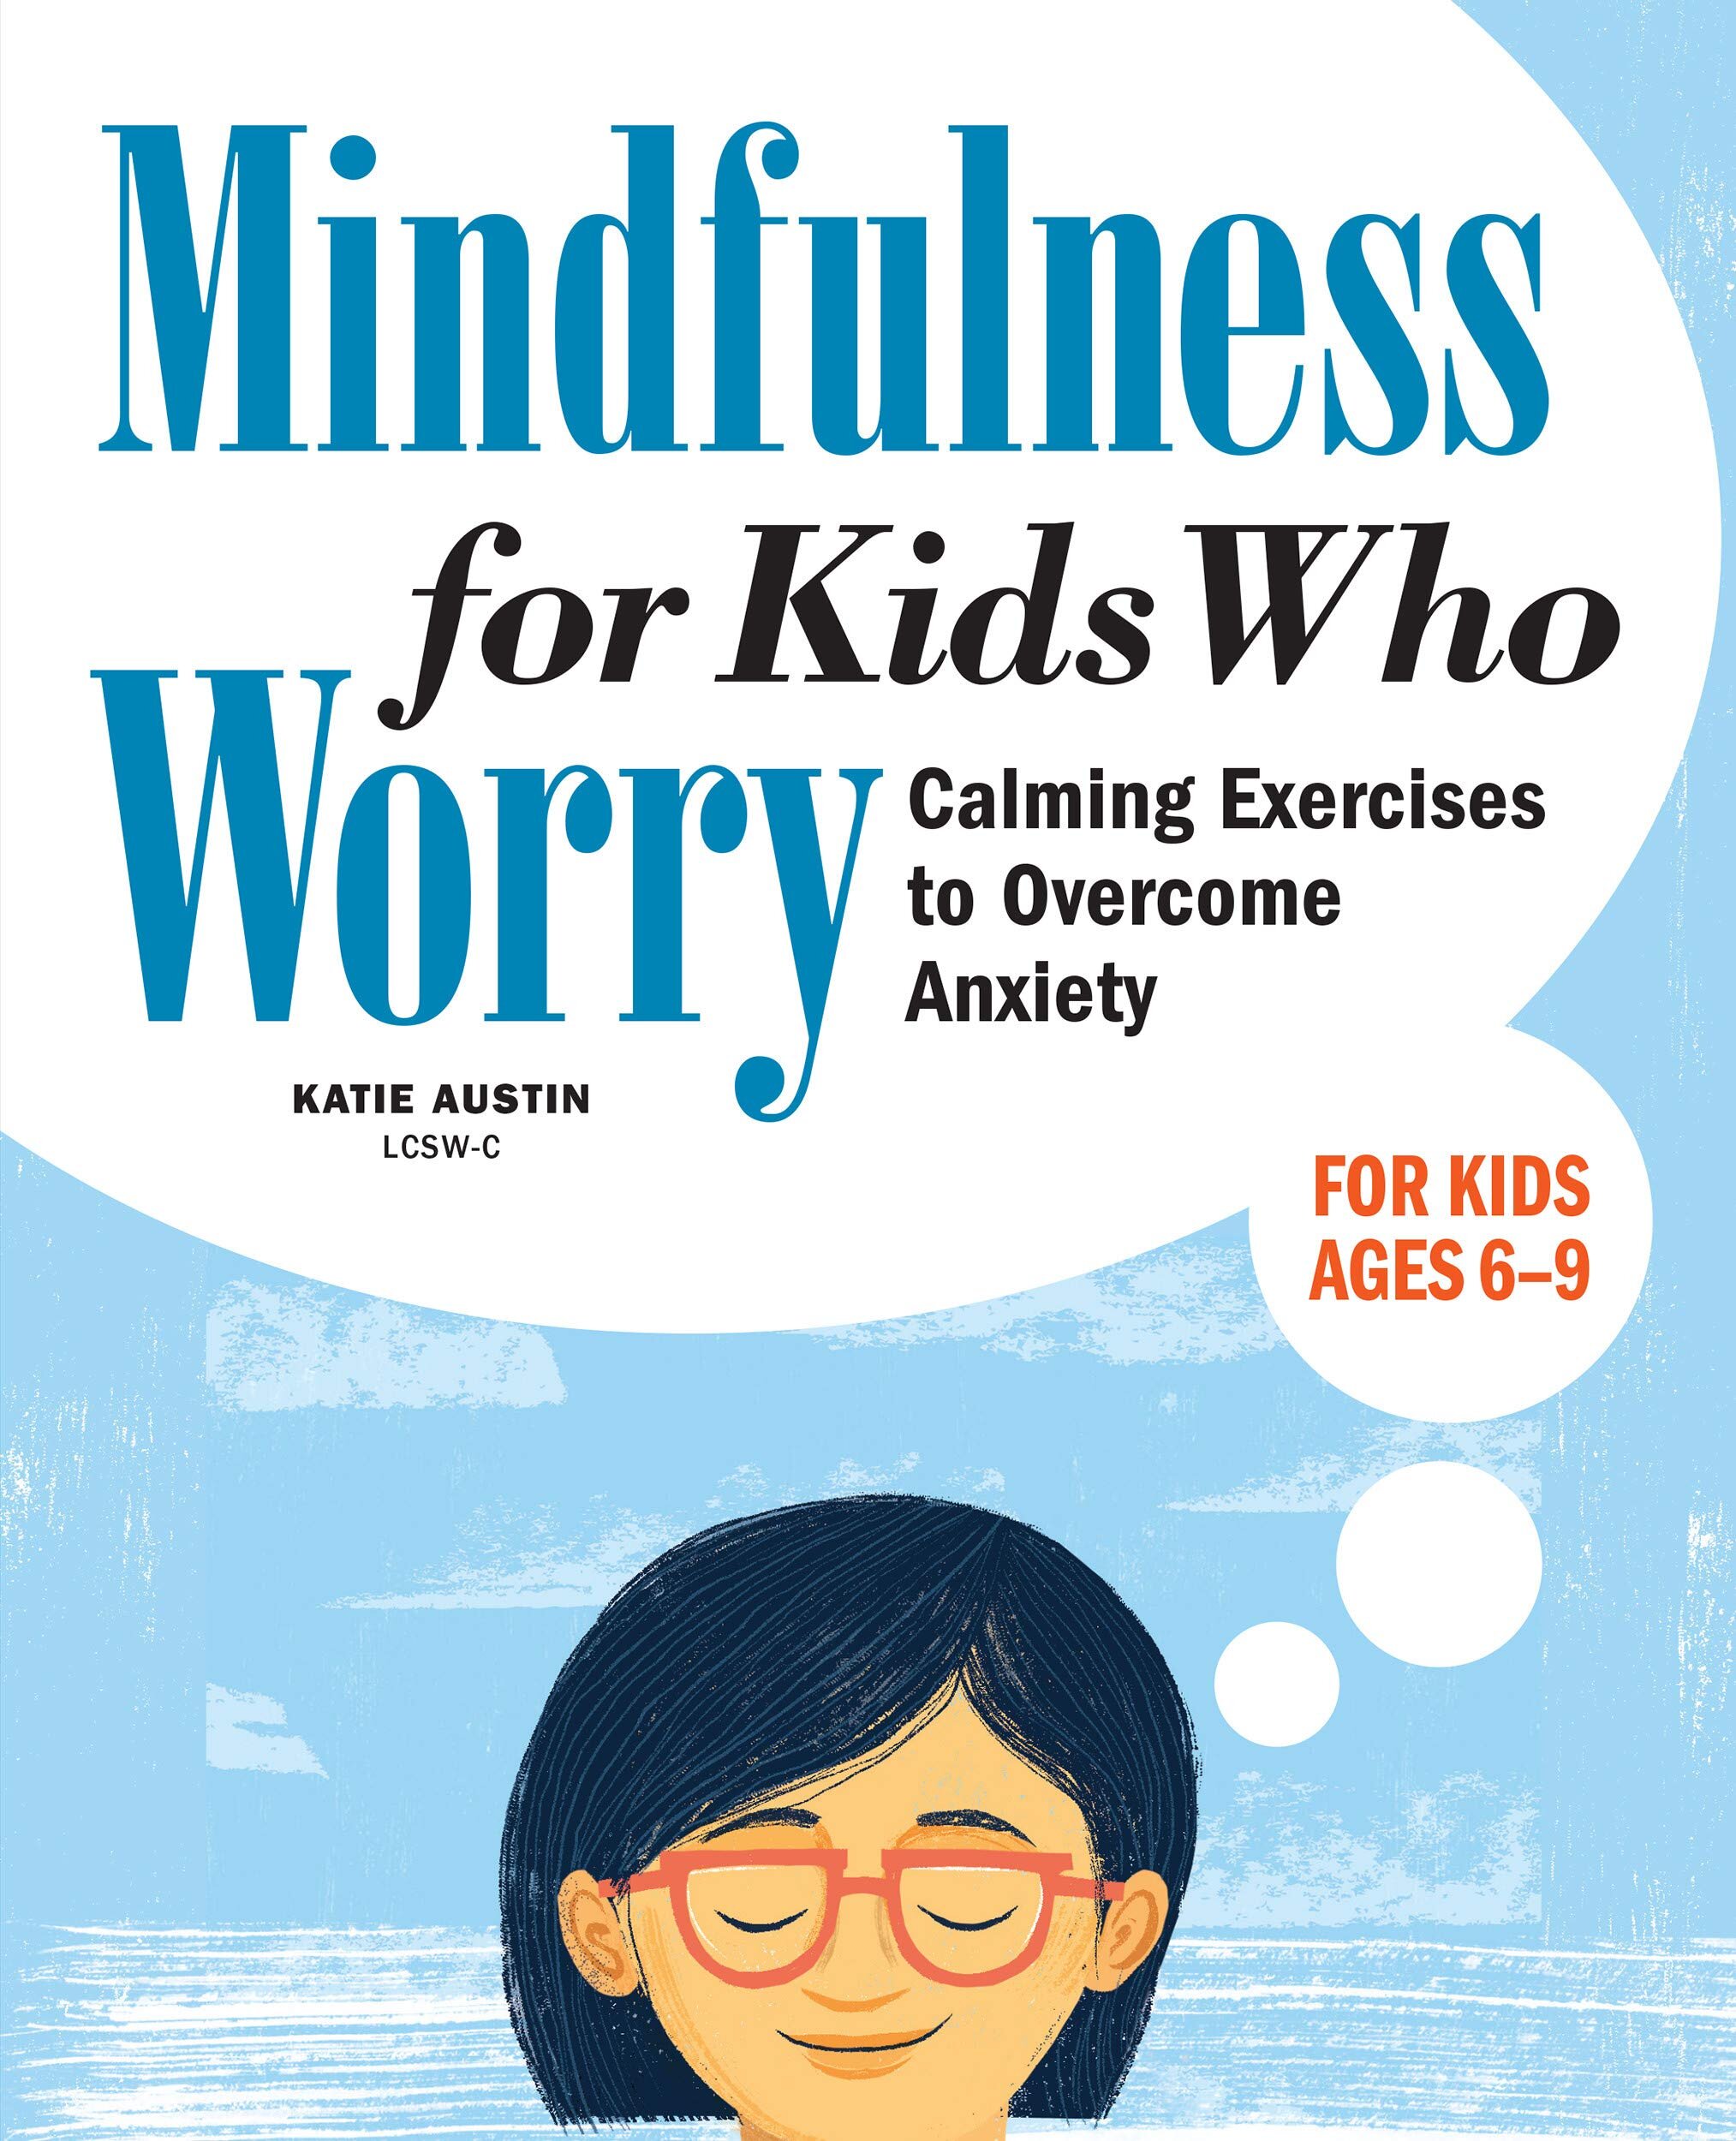 Childrens Books about Mindfulness: 14 Great Titles for Counseling Office